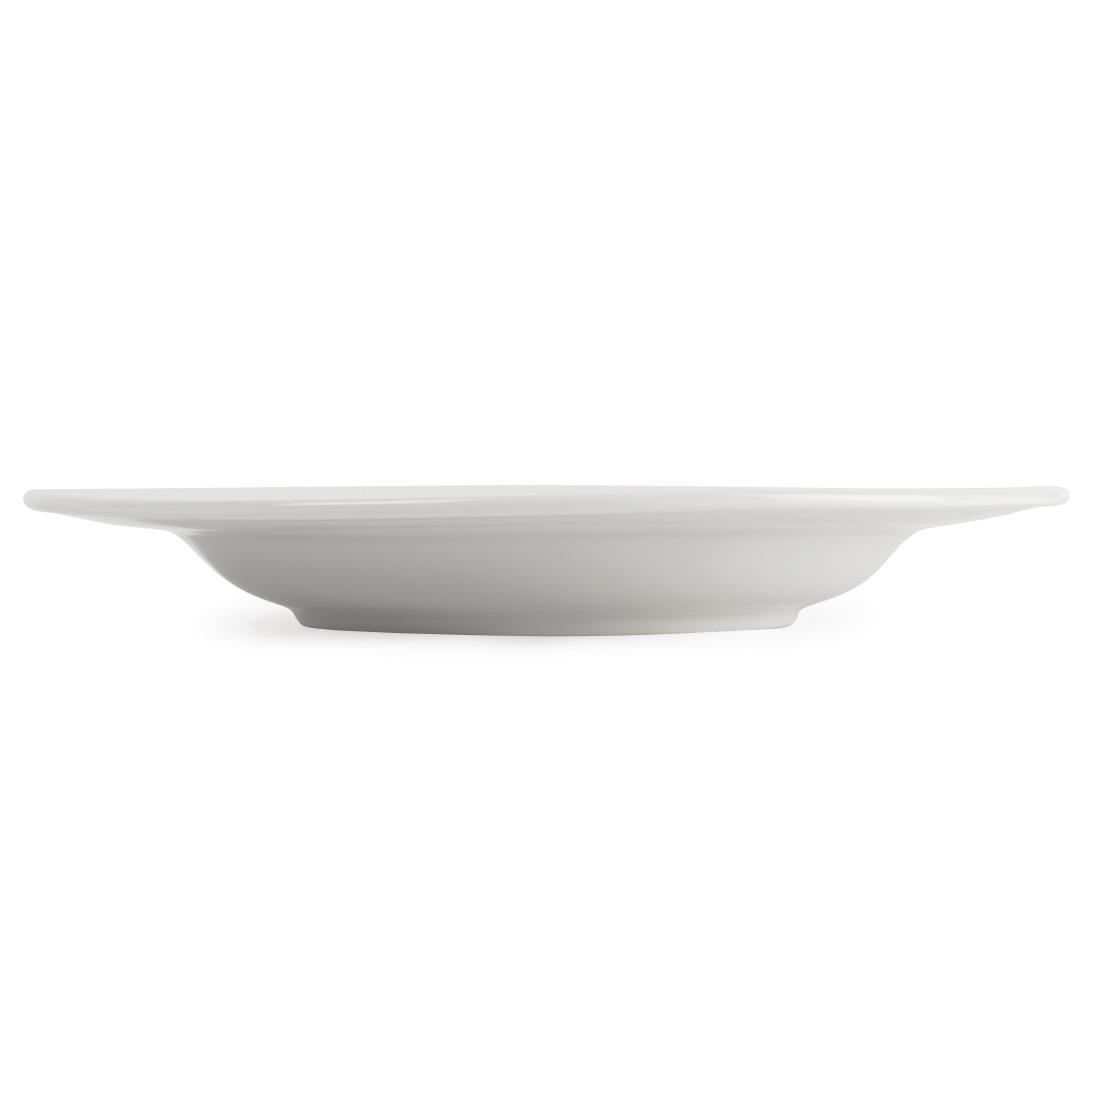 Olympia Linear Pasta Plates 310mm (Pack of 6) - U096  - 4